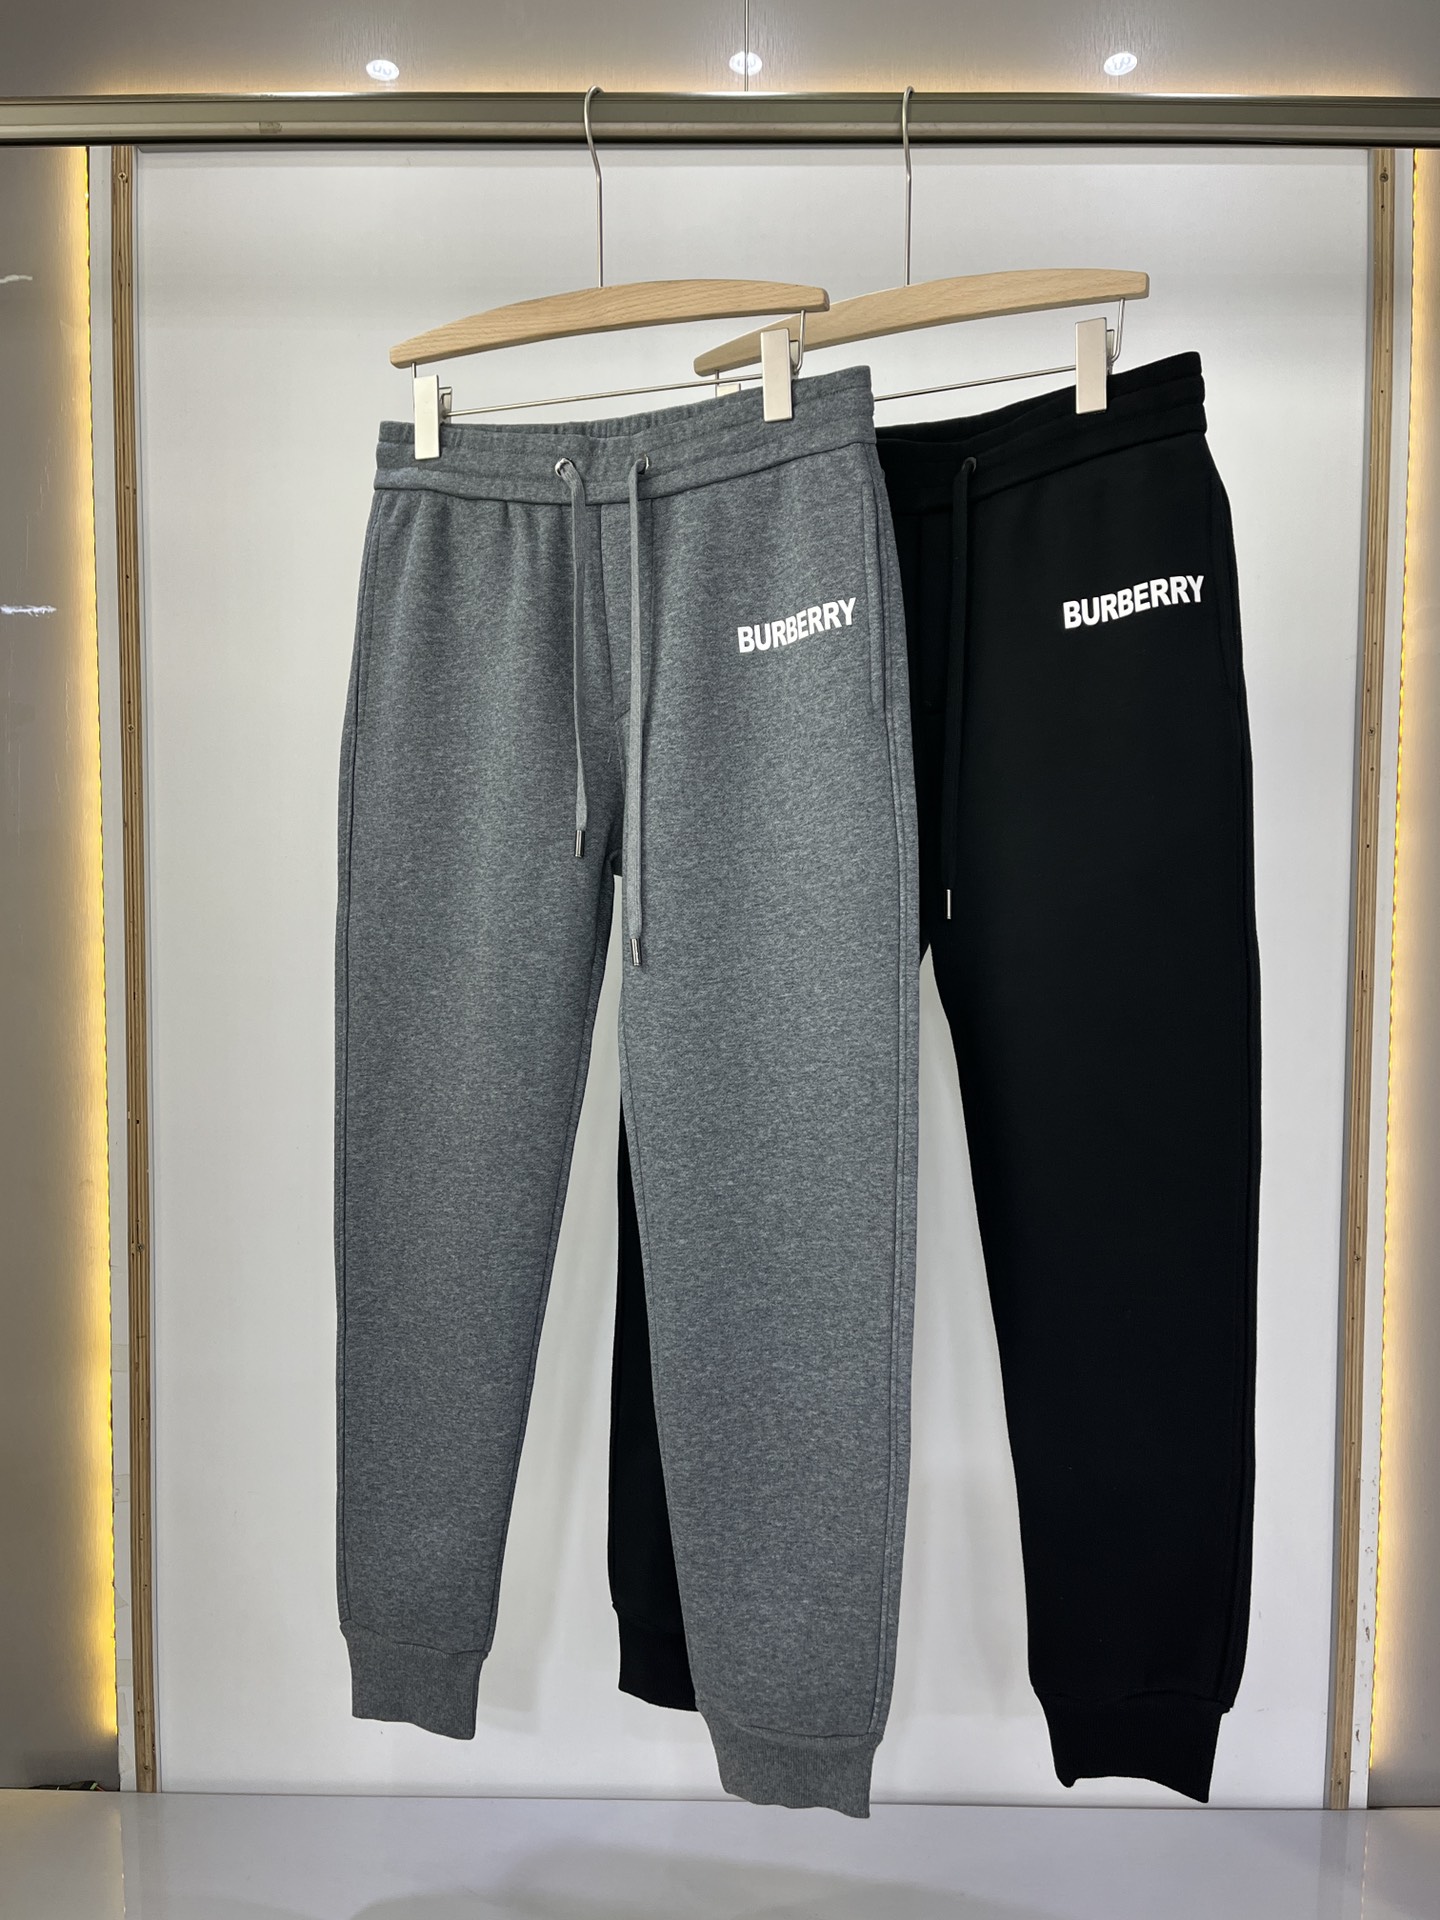 Burberry Clothing Pants & Trousers Online From China Designer
 Fall/Winter Collection Fashion Sweatpants